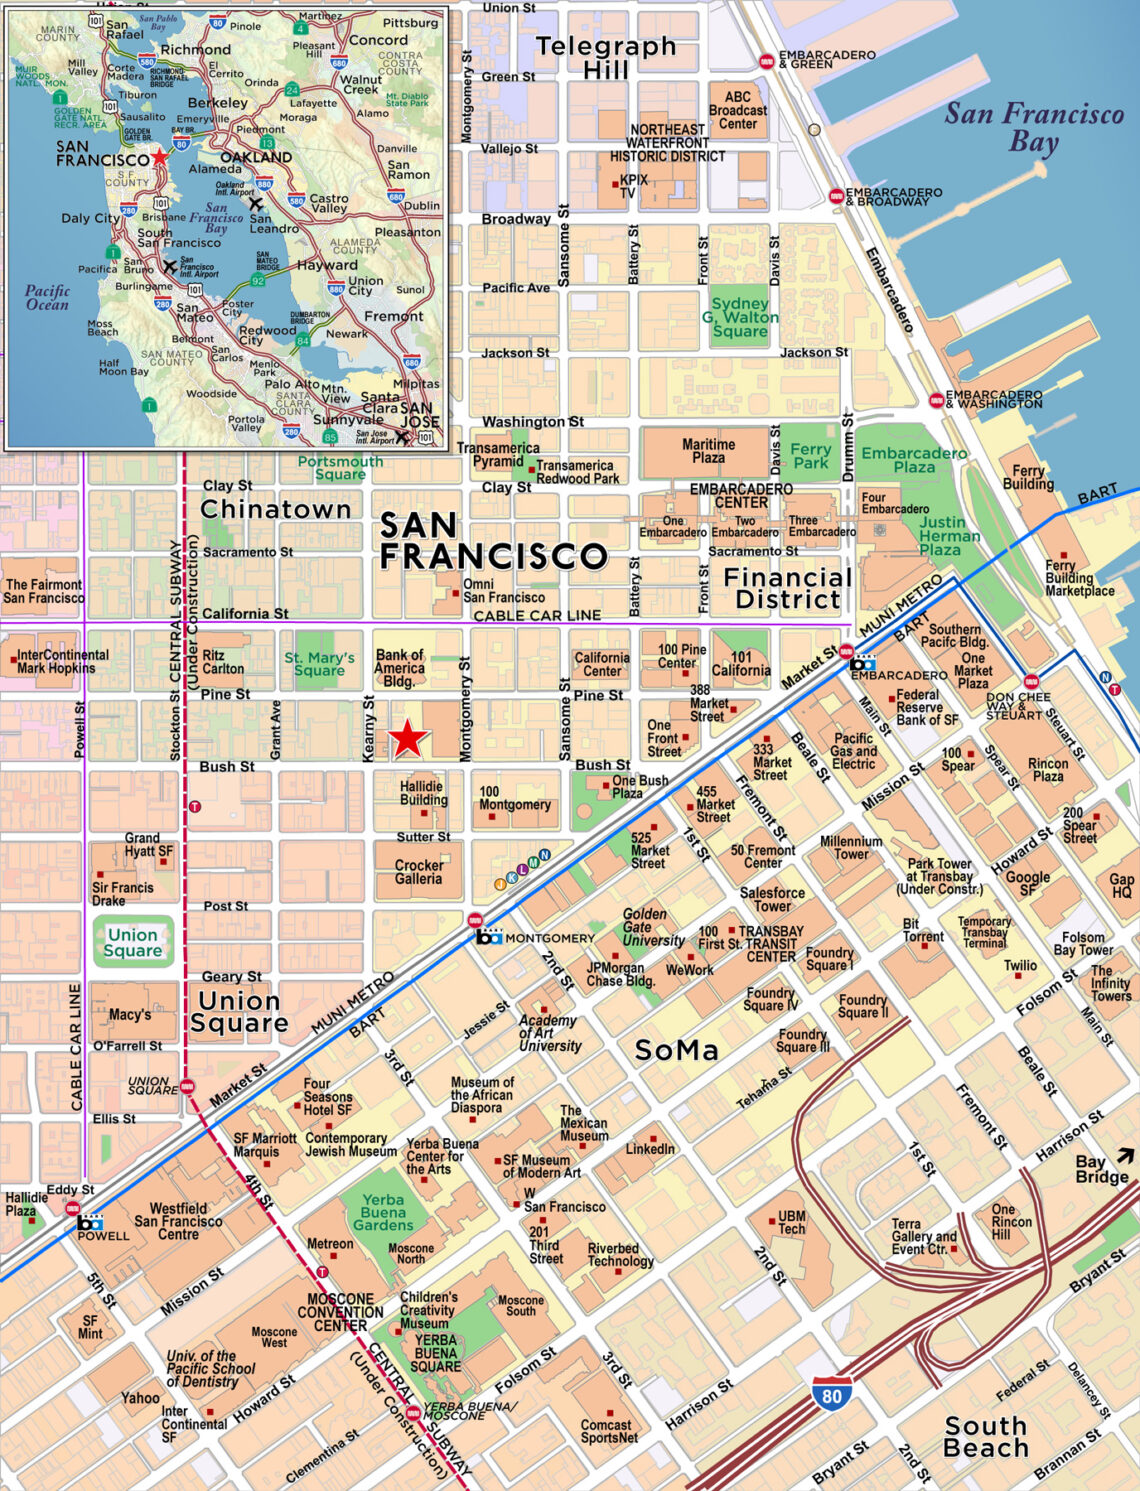 Custom Mapping & GIS Services in San Francisco, CA - Red Paw Technologies